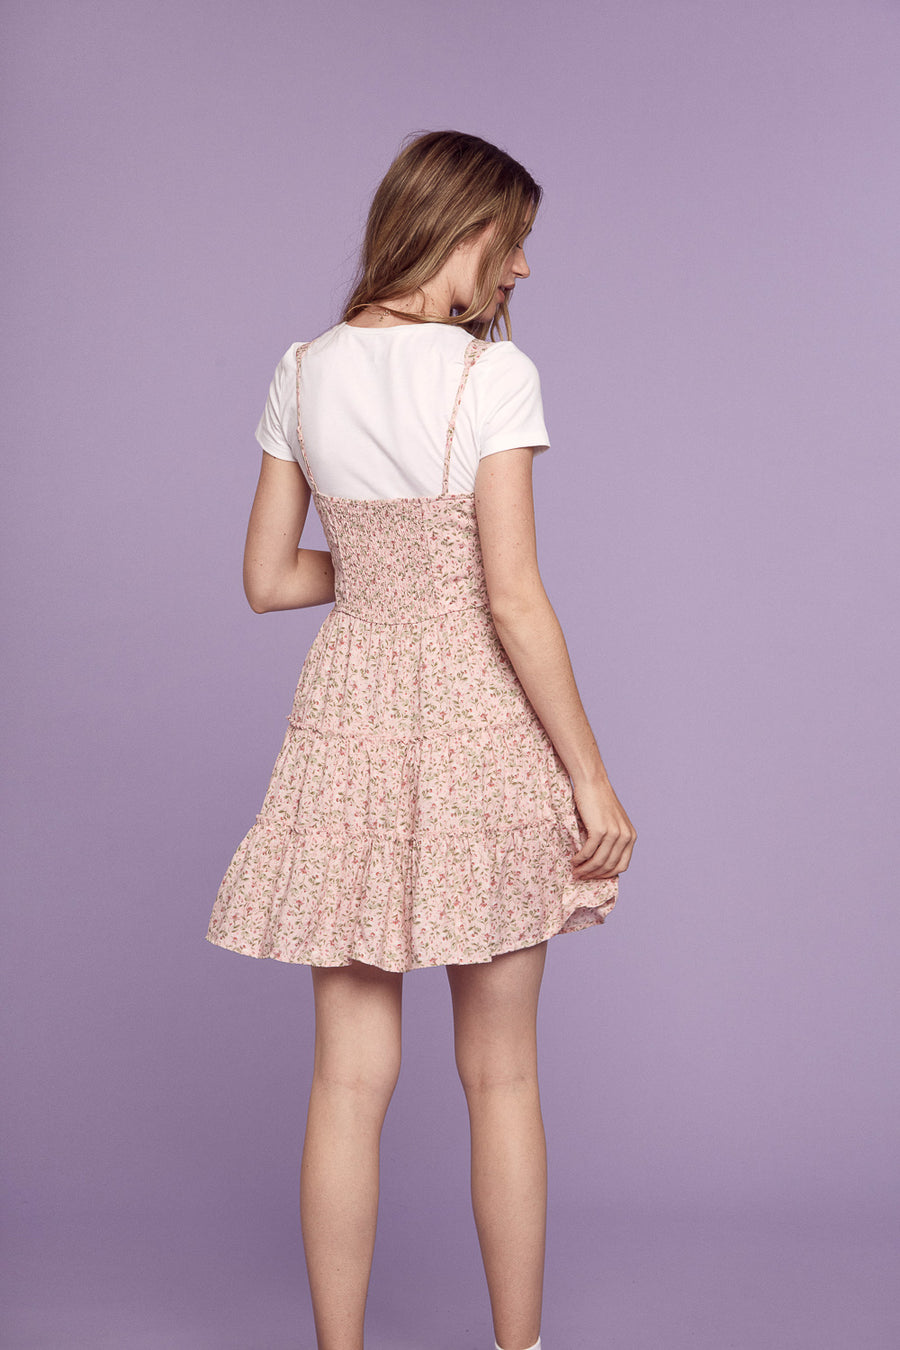 Spring Floral Tiered Dress - Trixxi Clothing